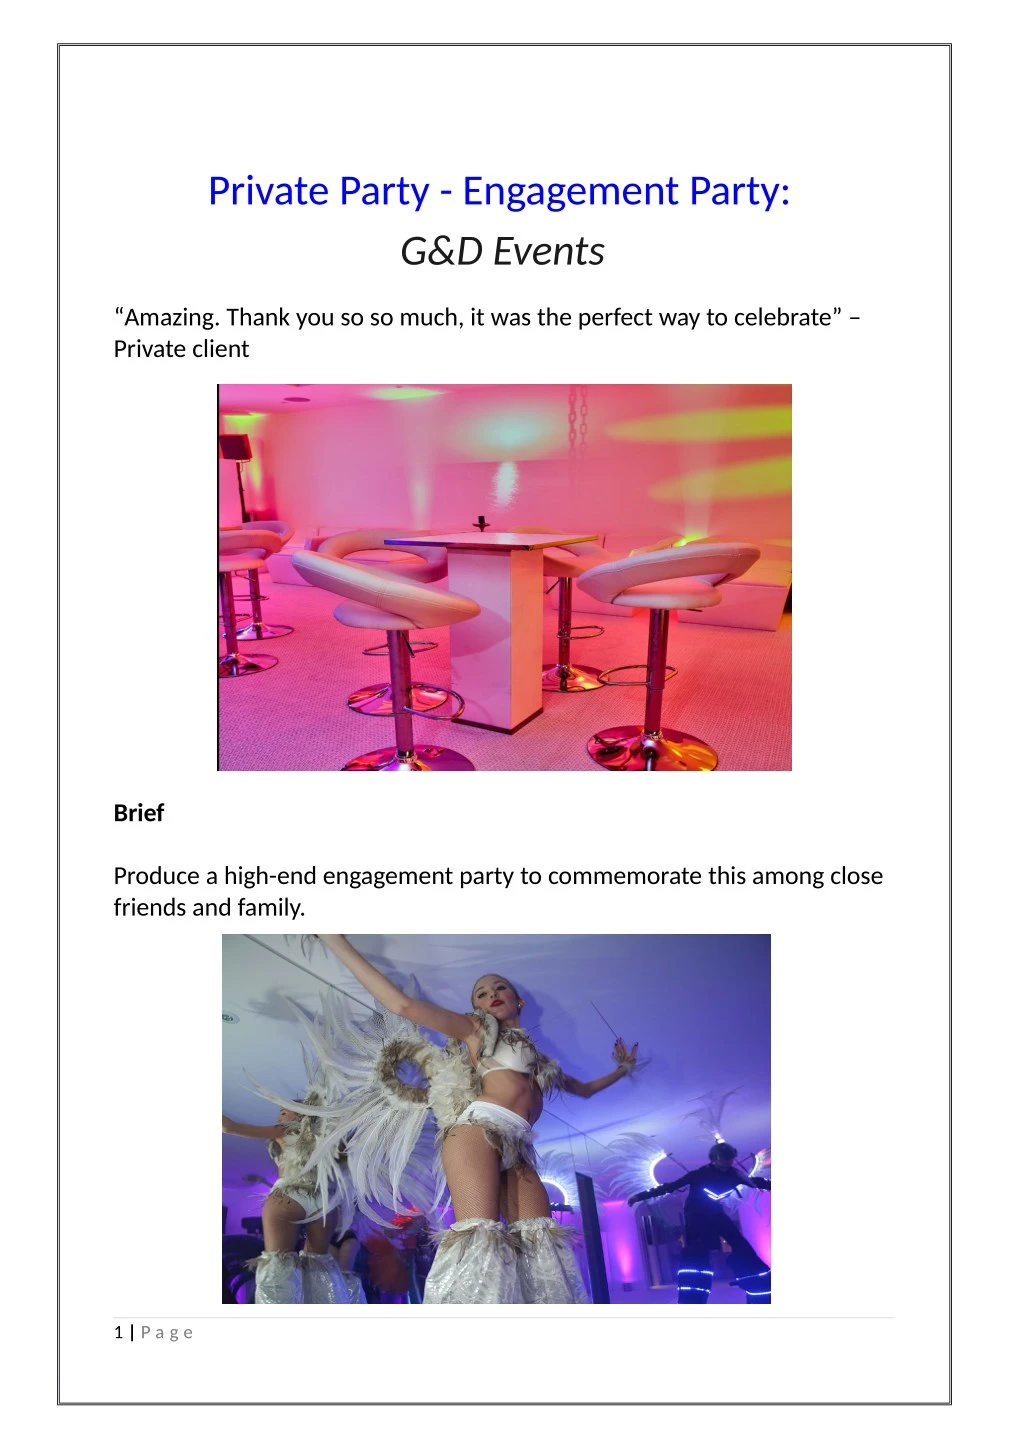 private party engagement party g d events